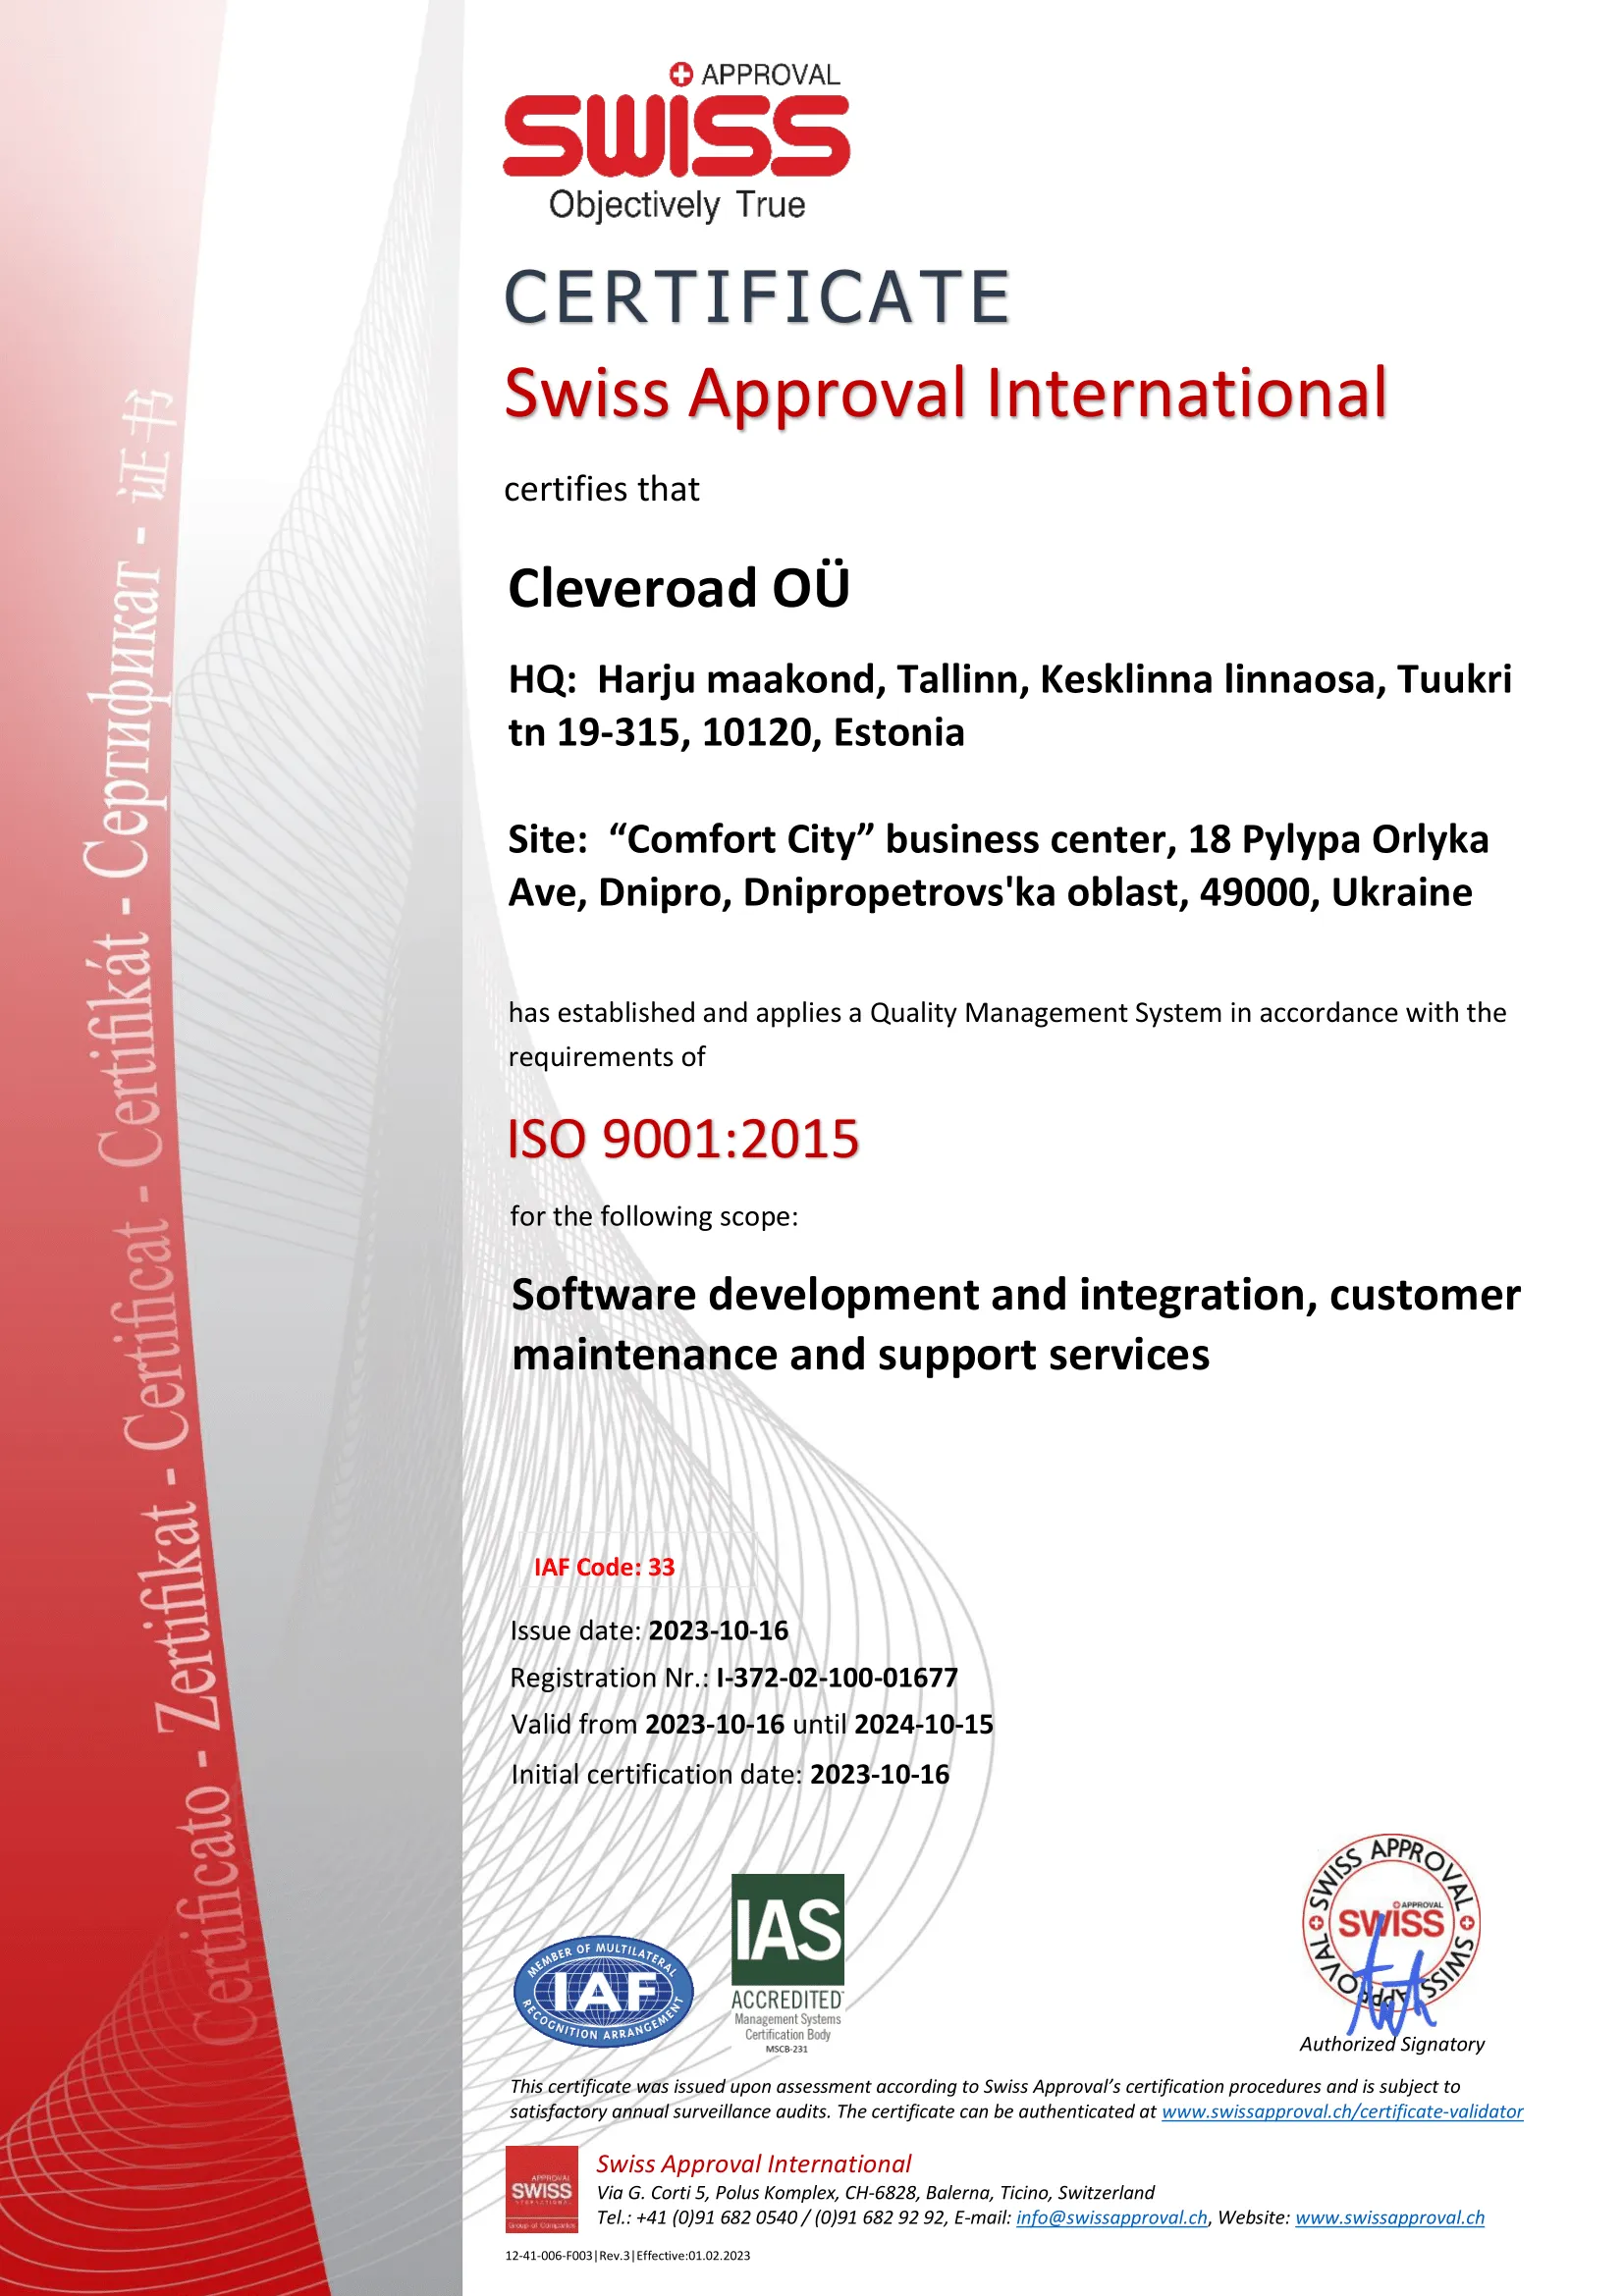 Cleveroad received the ISO 9001:2015 Quality Management CertificationStandard